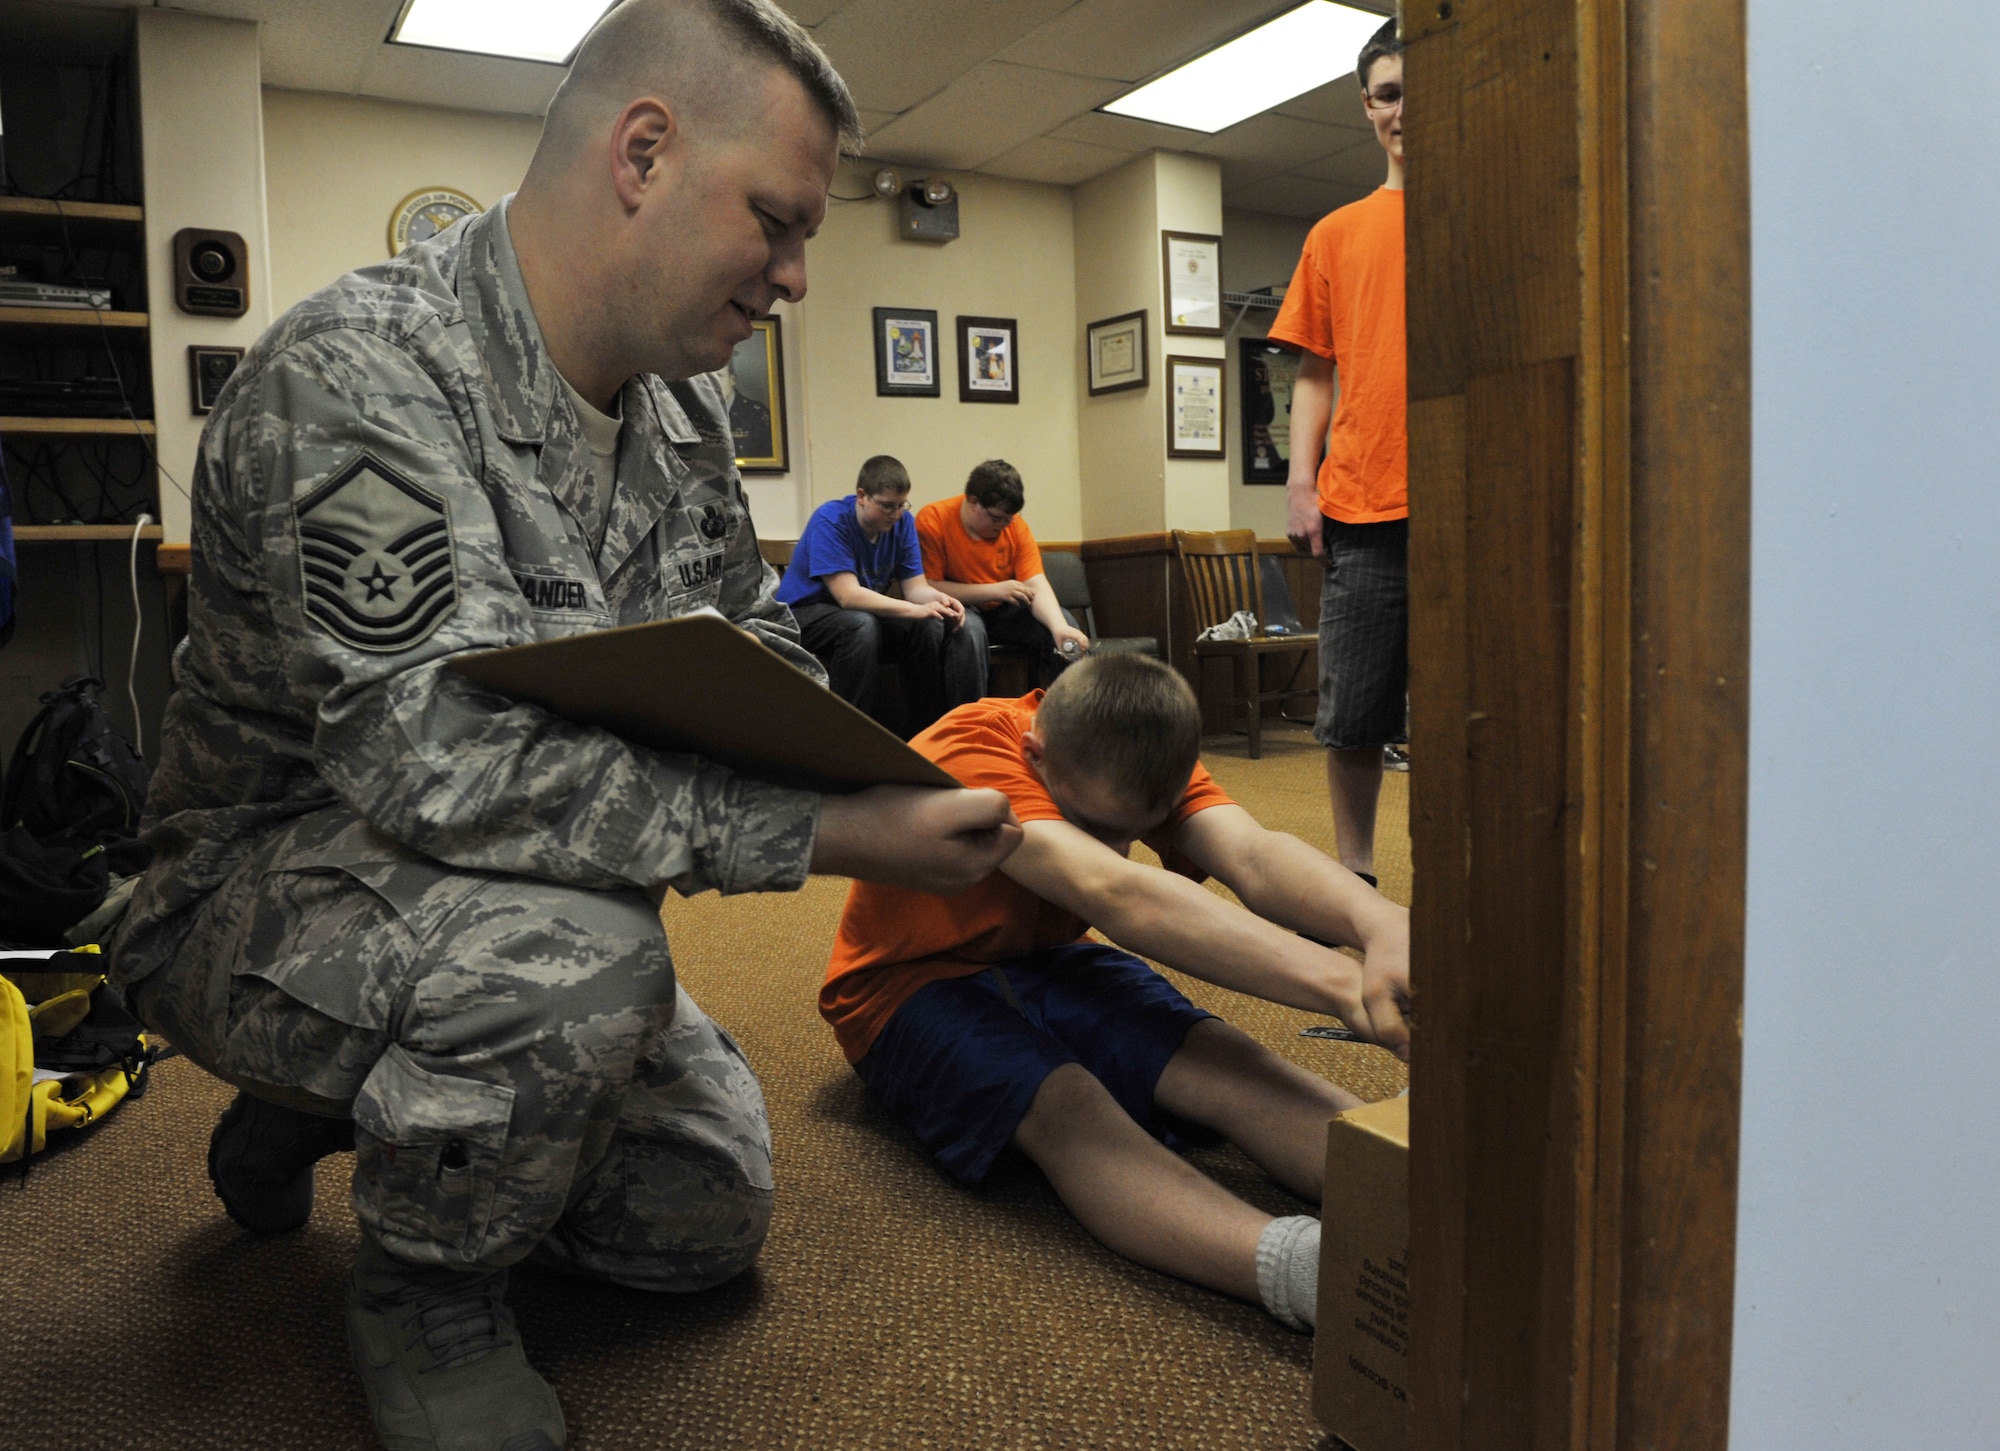 Master Sgt. William Sander, 509th Comptroller Squadron financial services superintendent, measures Camren’s, 15, a Civil Air Patrol cadet, sit-and-reach physical assessment, March 28, 2013, in Sedalia, Mo. The cadet physical fitness training is aligned with the President’s Challenge, a fitness program sponsored by the President’s Council on Physical Fitness and Sports. (U.S. Air Force photo by Heidi Hunt/Released)